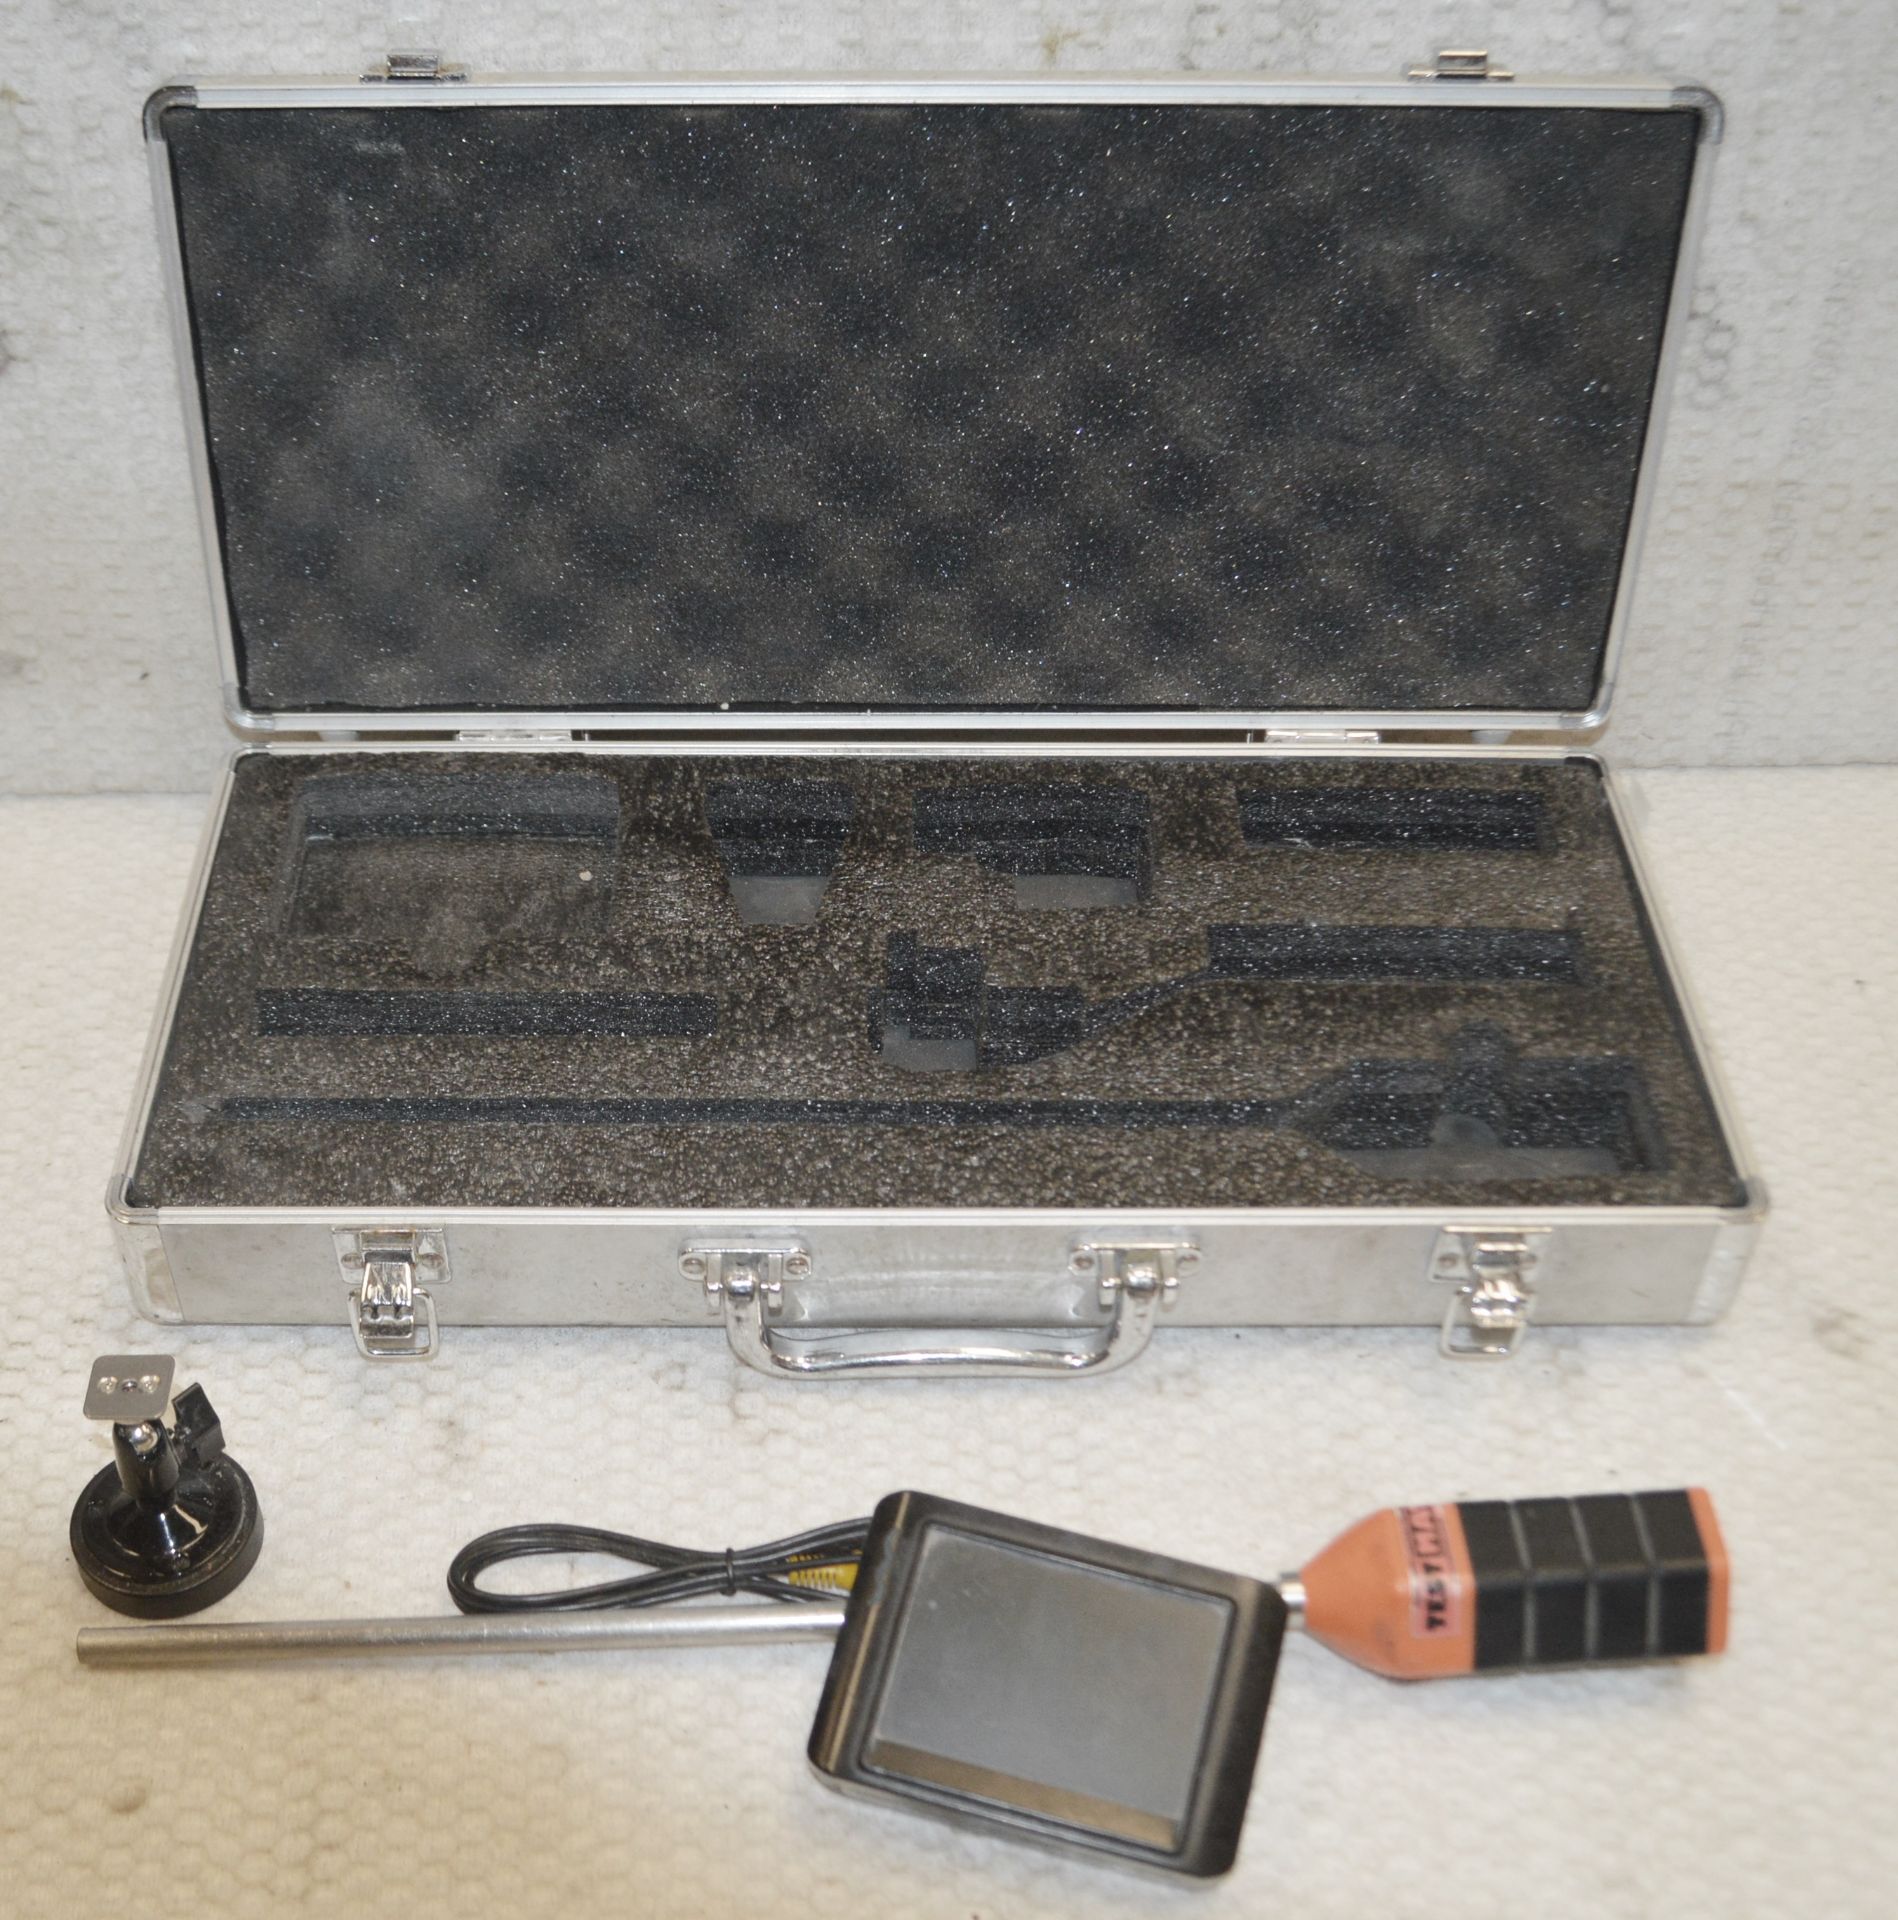 1 x Cavic Test Mate Inspection Camera - Includes Wireless Inspection Camera and Video Recording - Image 5 of 6